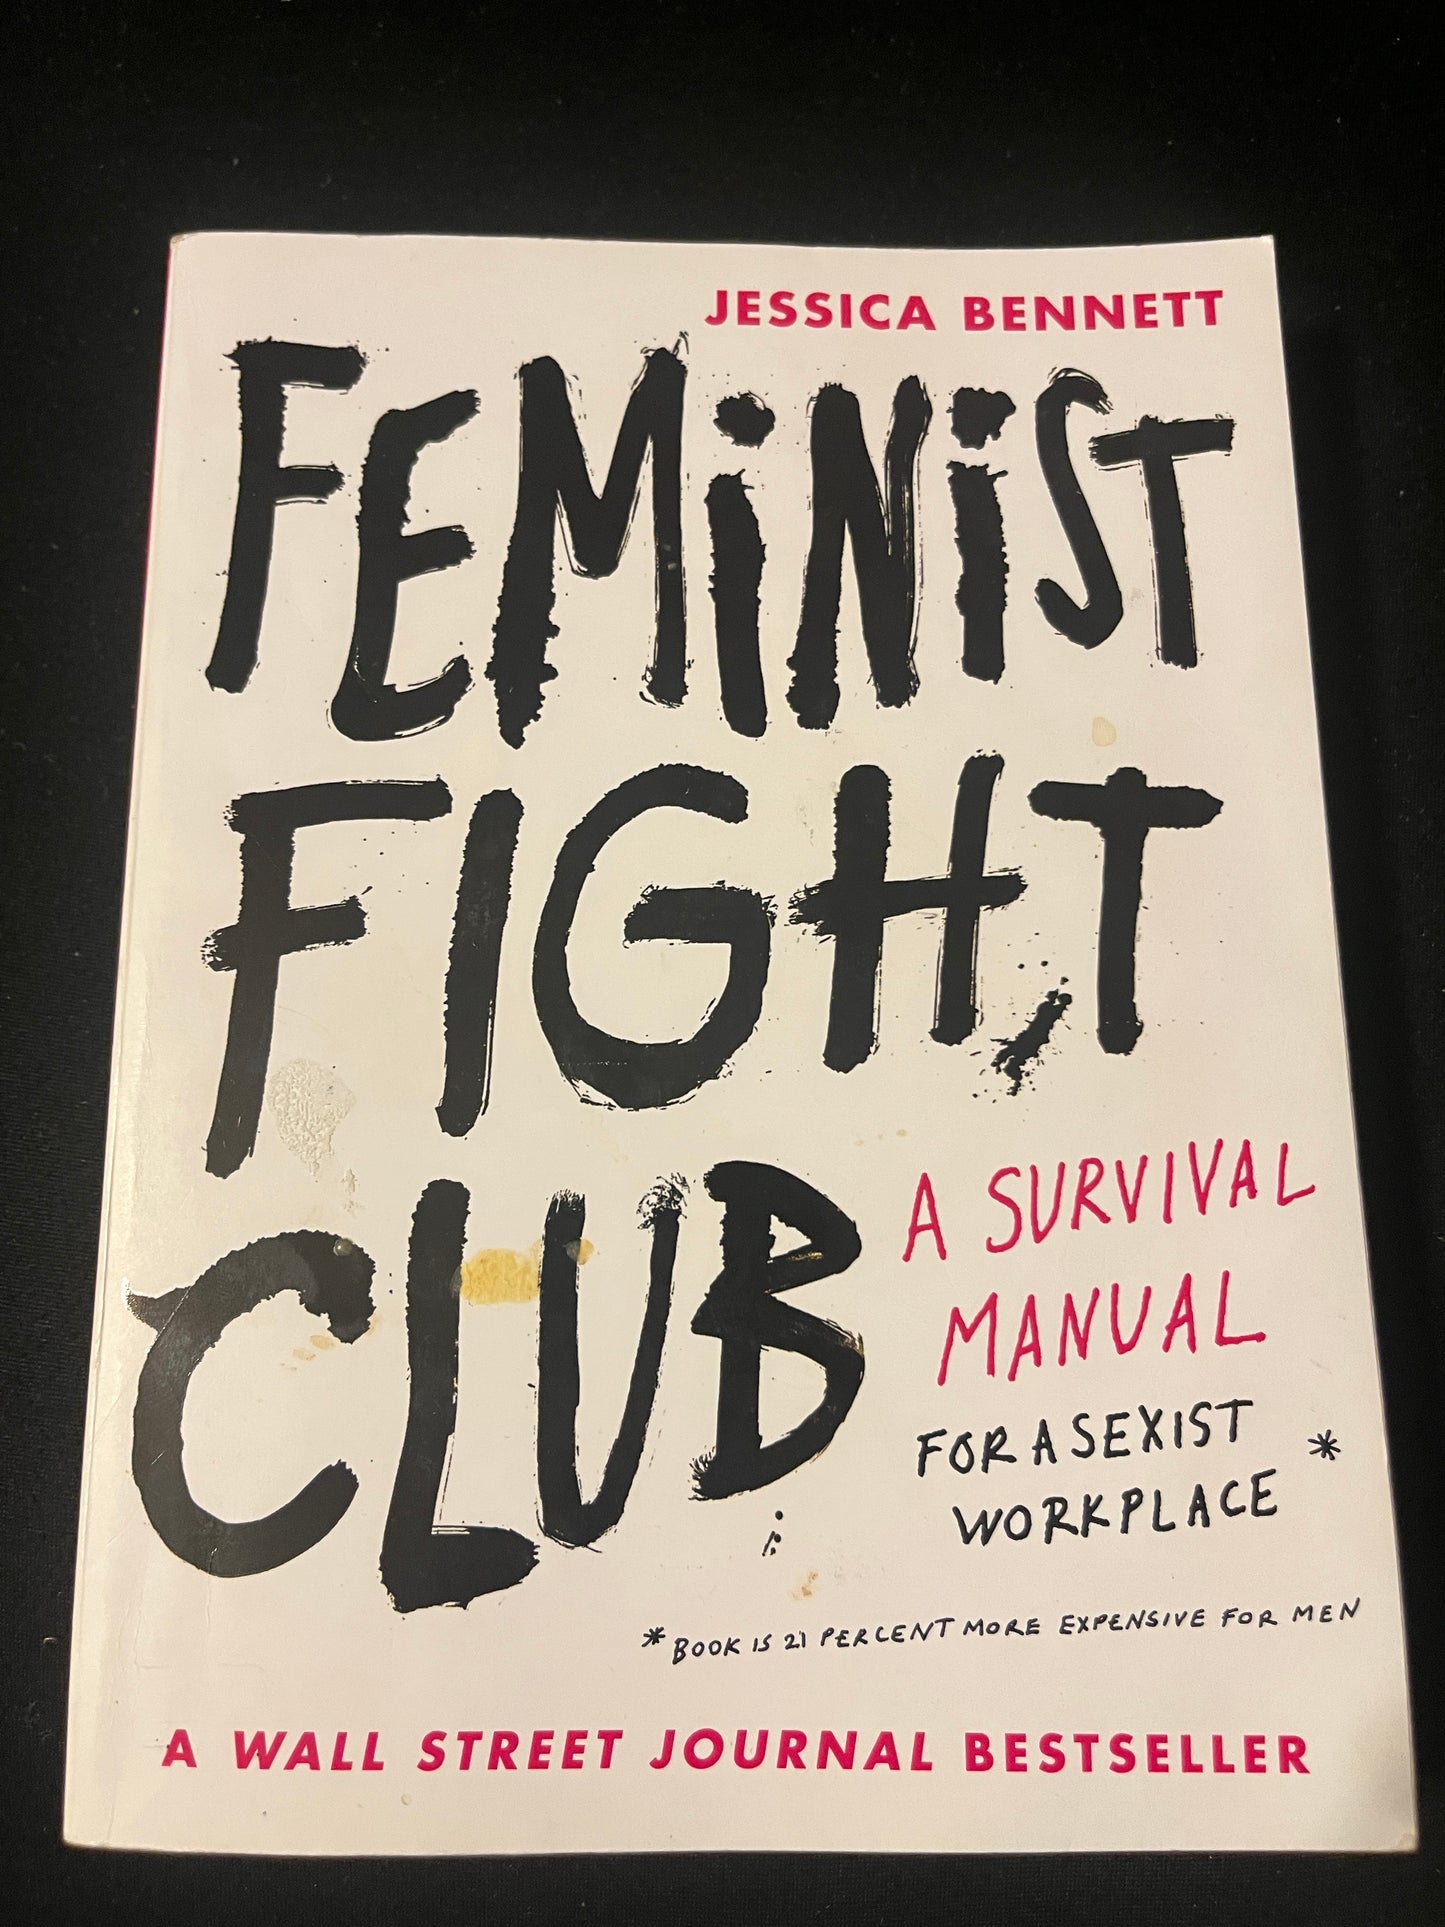 FEMINIST FIGHT CLUB: A SURVIVAL MANUAL FOR A SEXIST WORKPLACE by Jessica Bennett